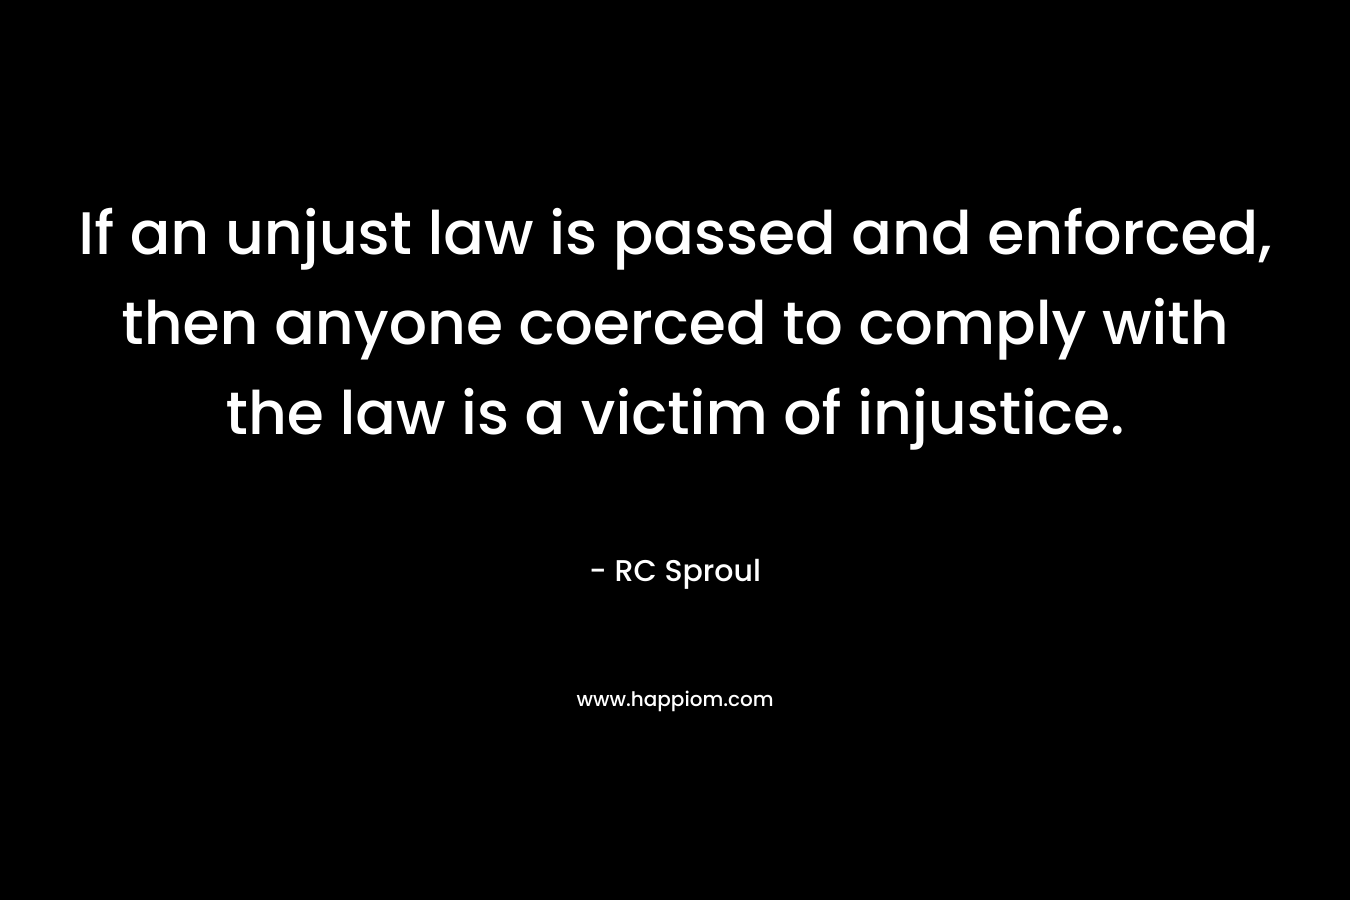 If an unjust law is passed and enforced, then anyone coerced to comply with the law is a victim of injustice. – RC Sproul